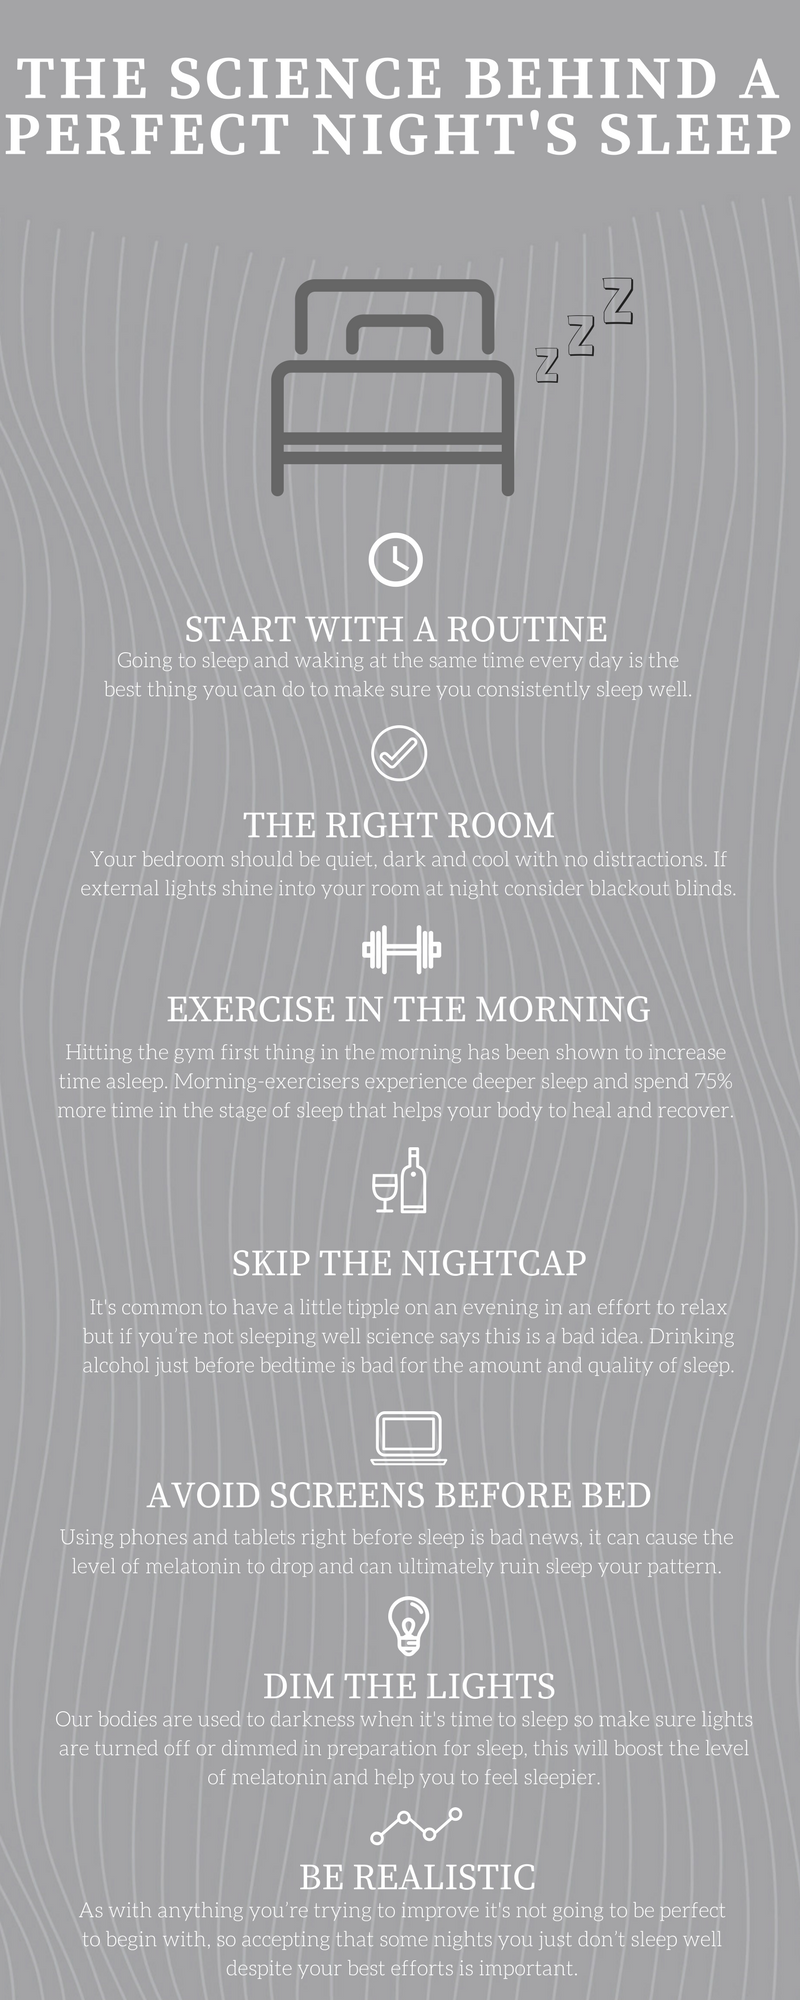 infographic are based on years of research aimed at improving sleep quality.